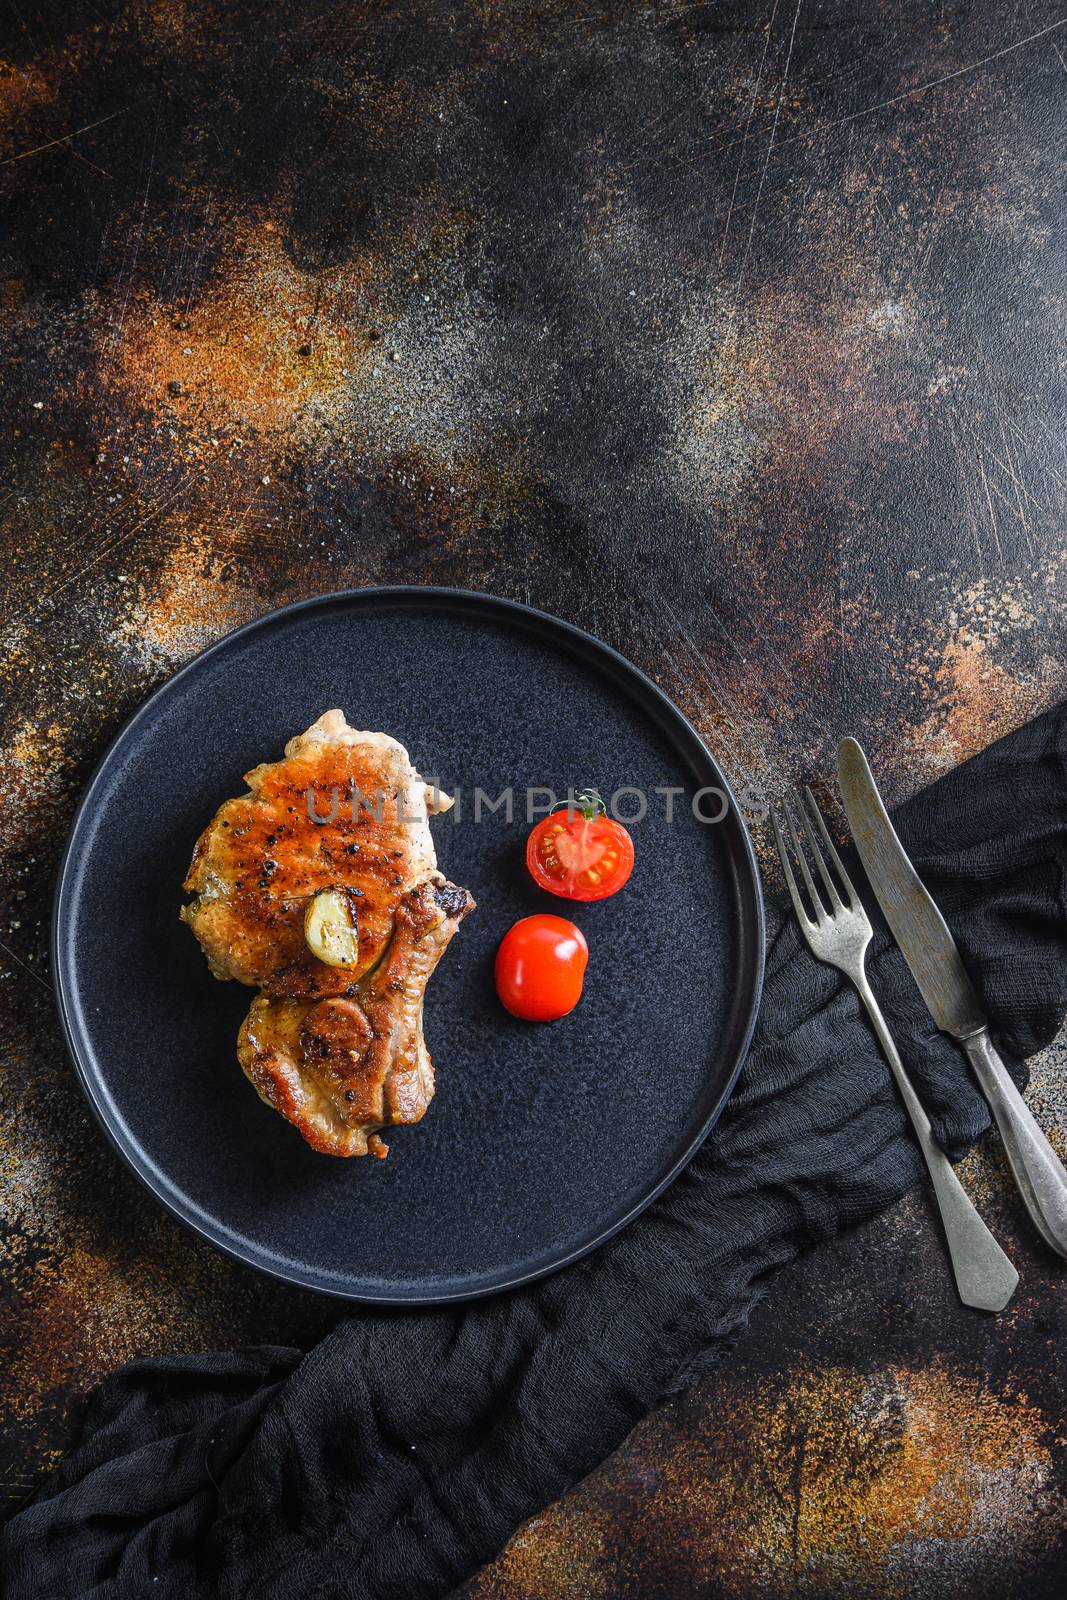 Grilled pork steak on the bone with seasonings on black dish with sfork and knife on cloth, over rustic metall surface overhead top view vertical space for text on top by Ilianesolenyi